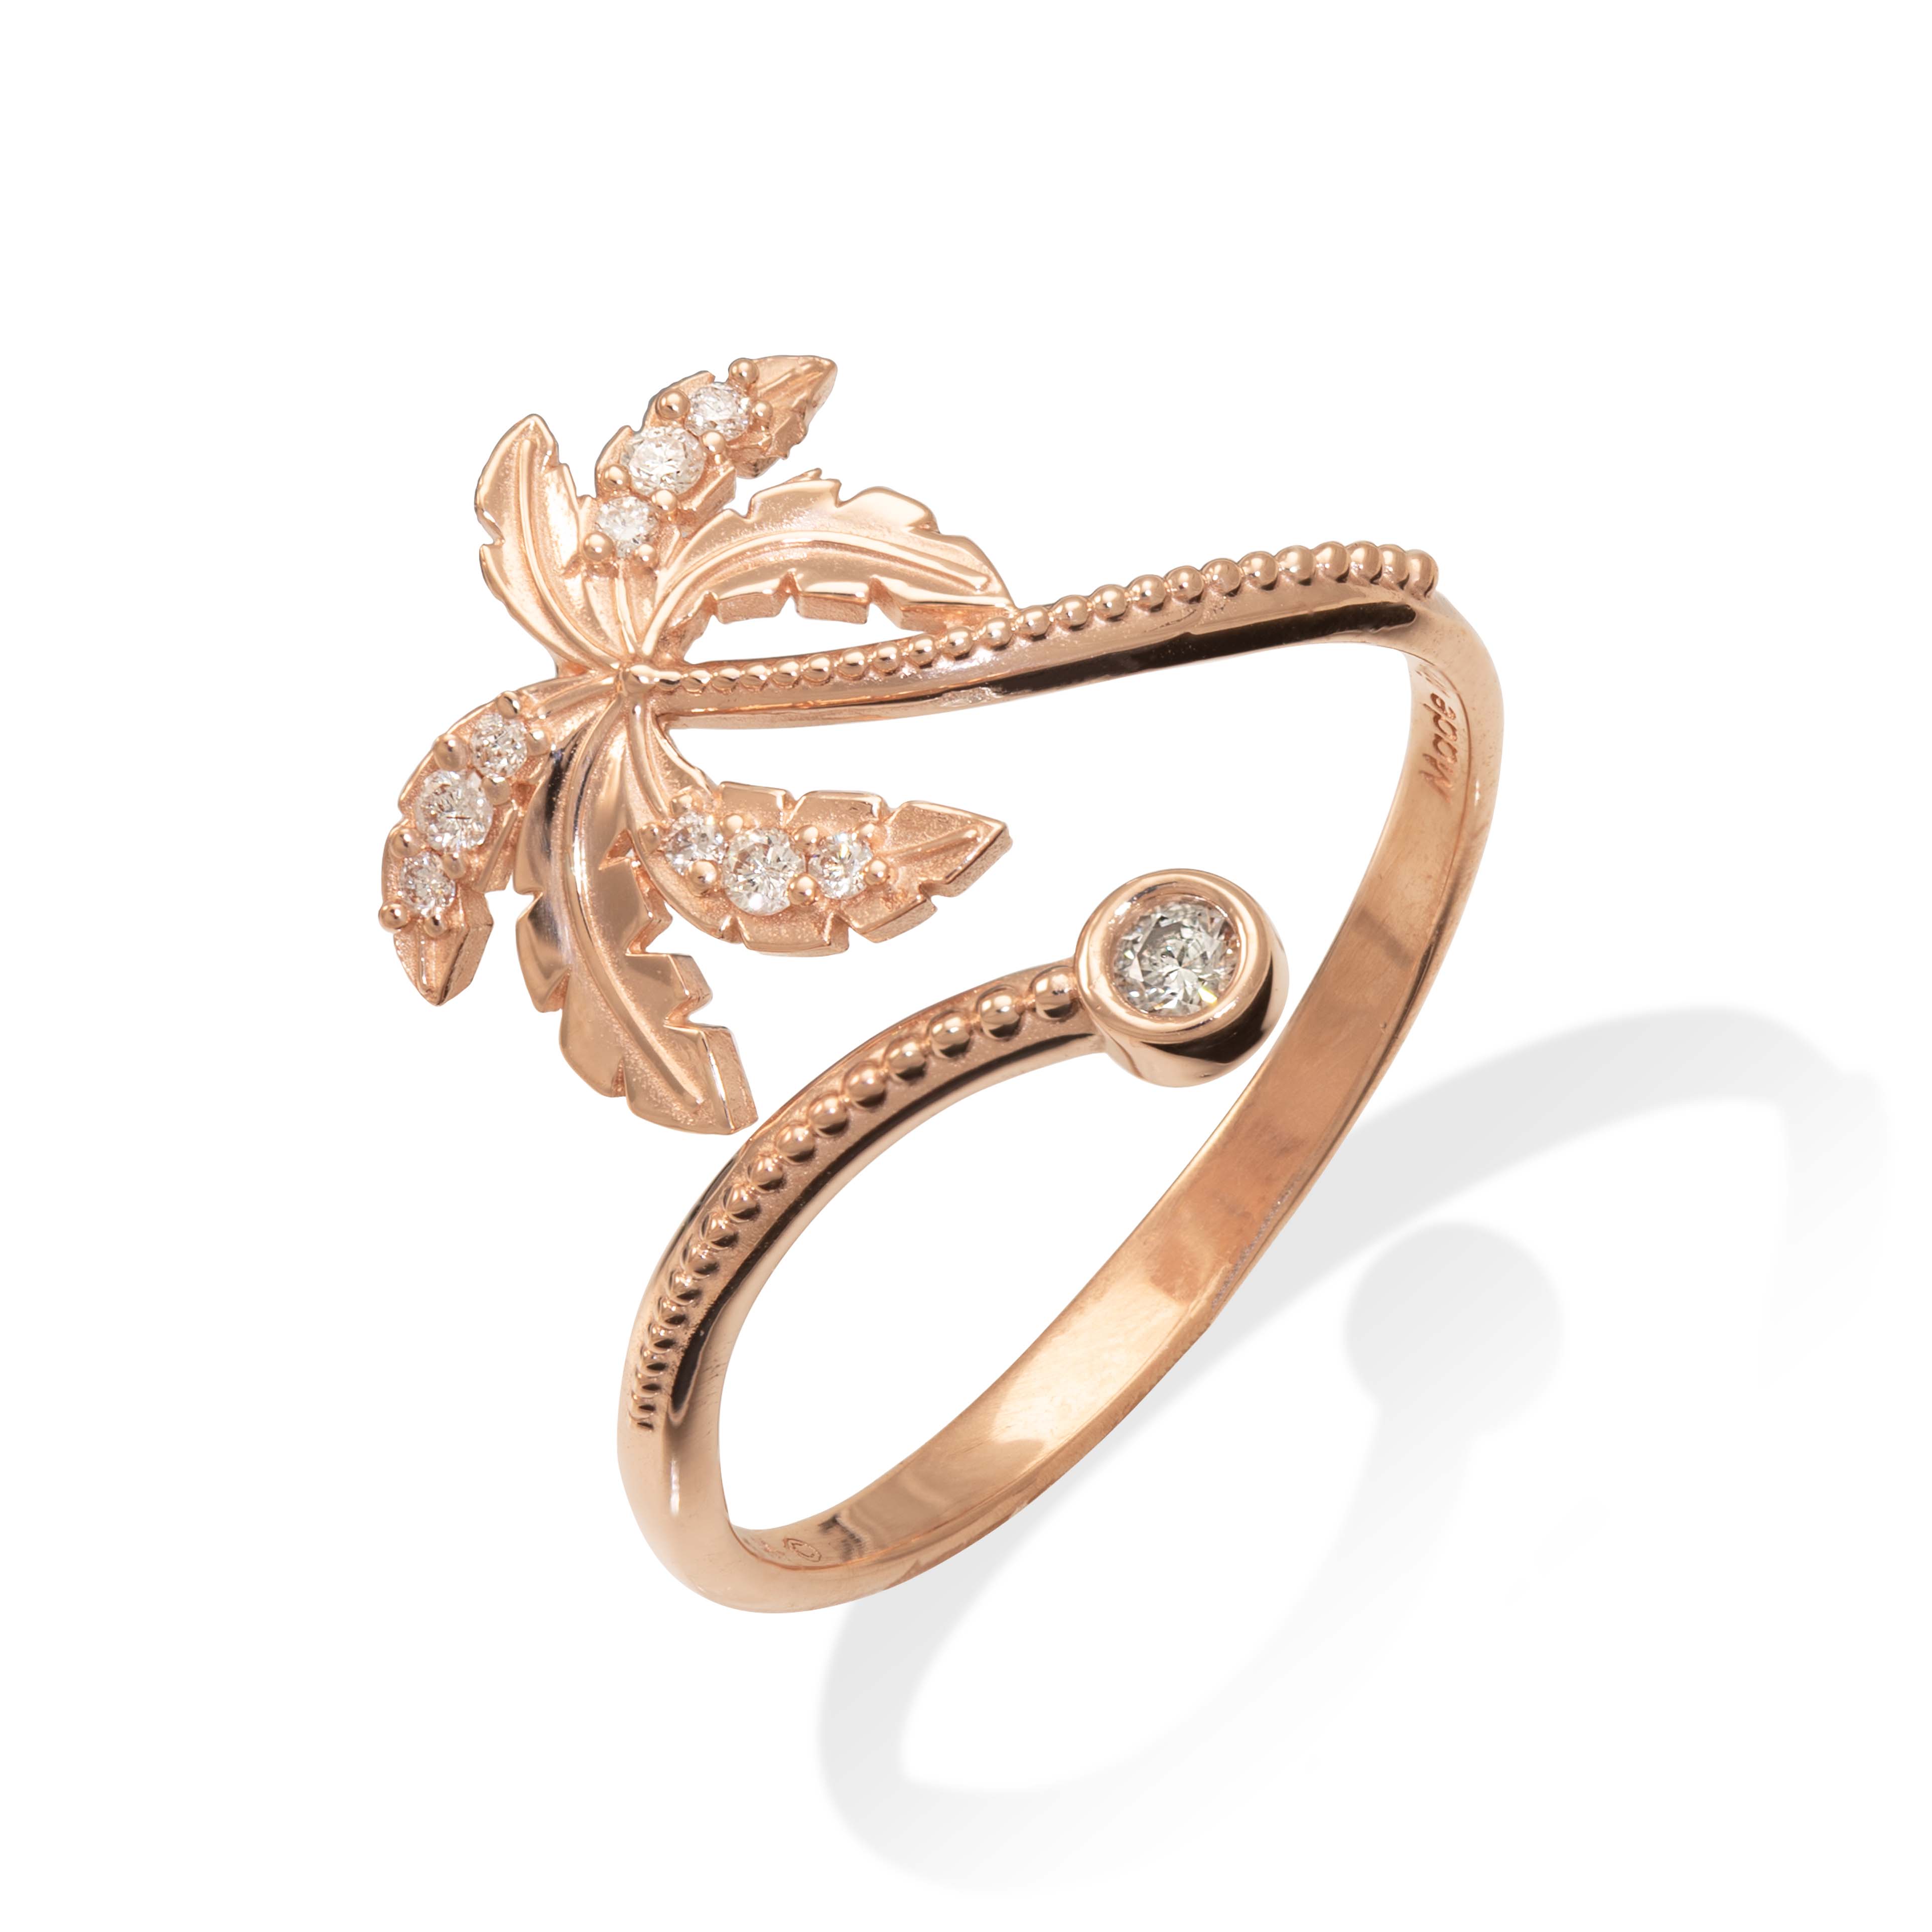 Palm Tree Ring in Rose Gold with Diamonds - 18mm - Maui Divers Jewelry